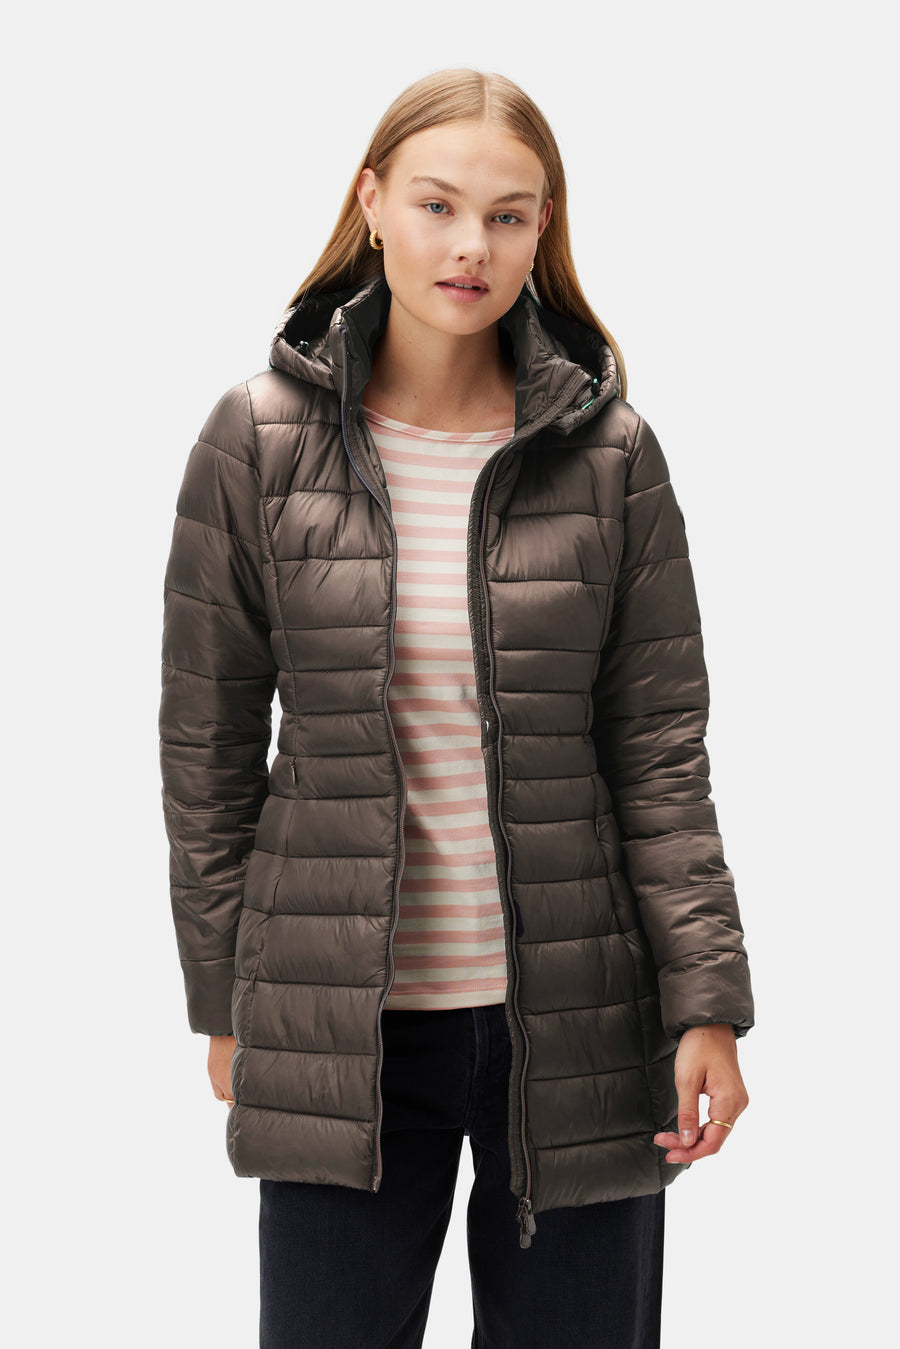 Save the Duck Reese Puffer Jacket - Mud Grey